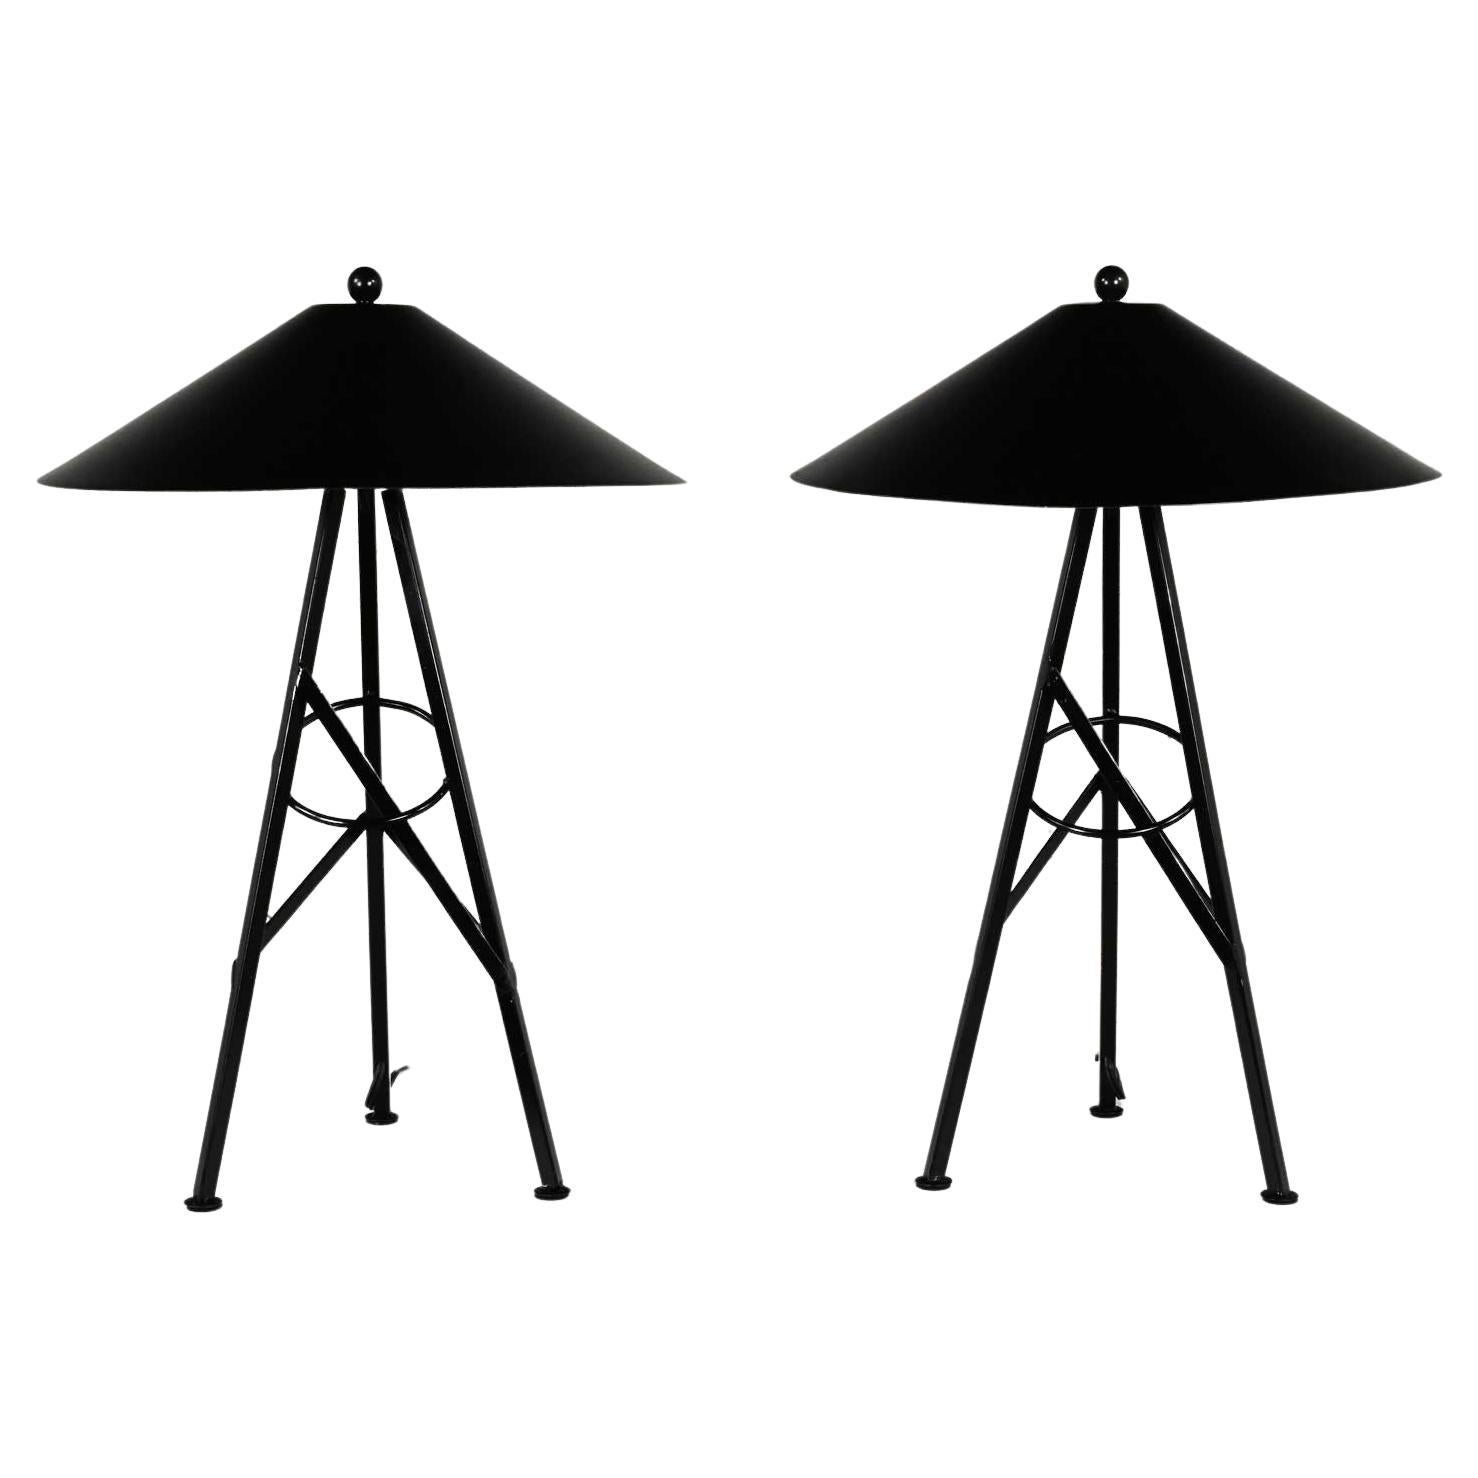 Late 20th Modern to Postmodern Metal Tri Leg Table Lamps Aluminum Coolie Shades